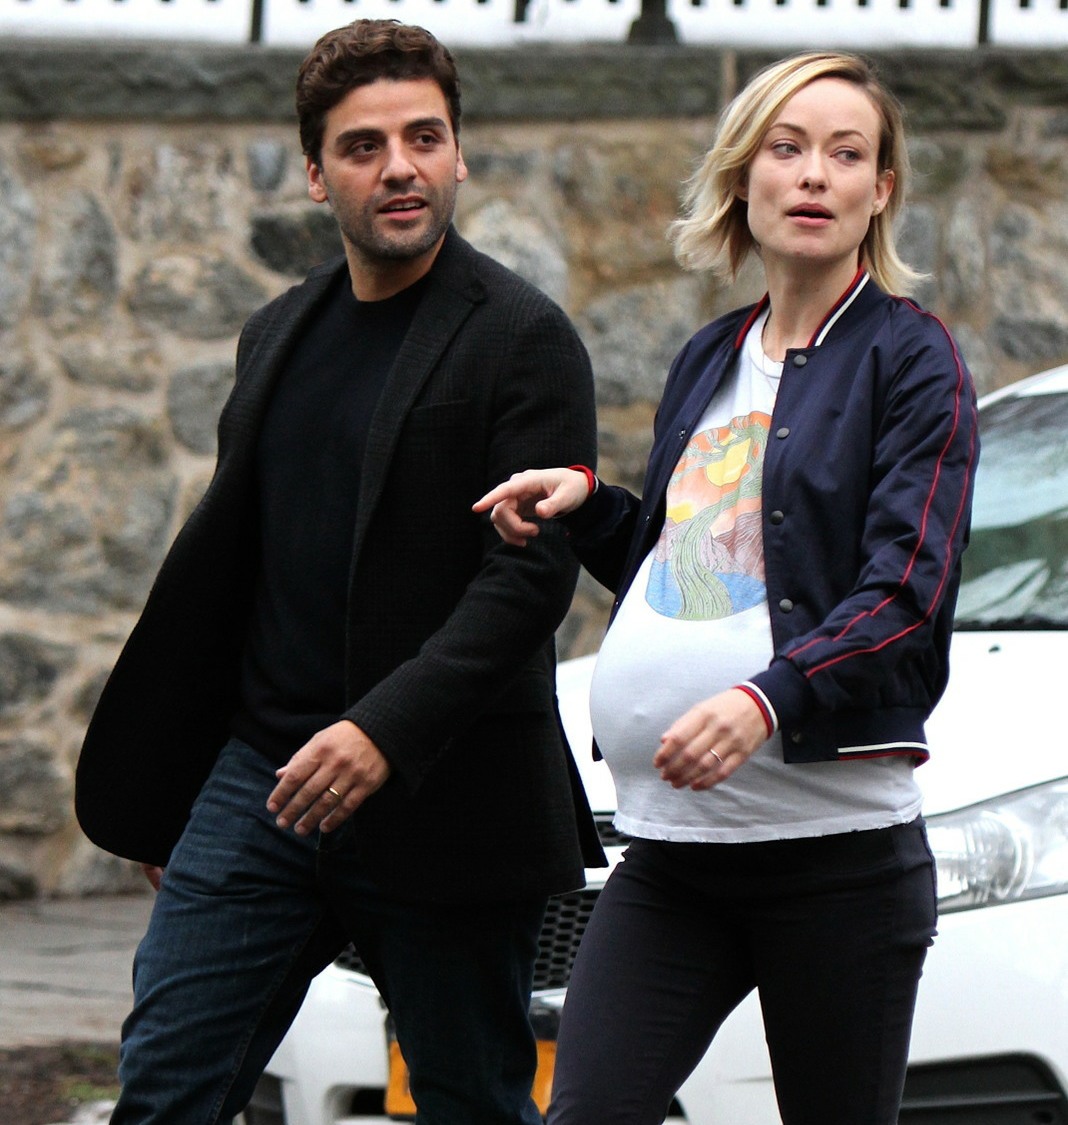 Olivia Wilde and Oscar Isaac filming scenes at the 'Life Itself' movie set in NYC